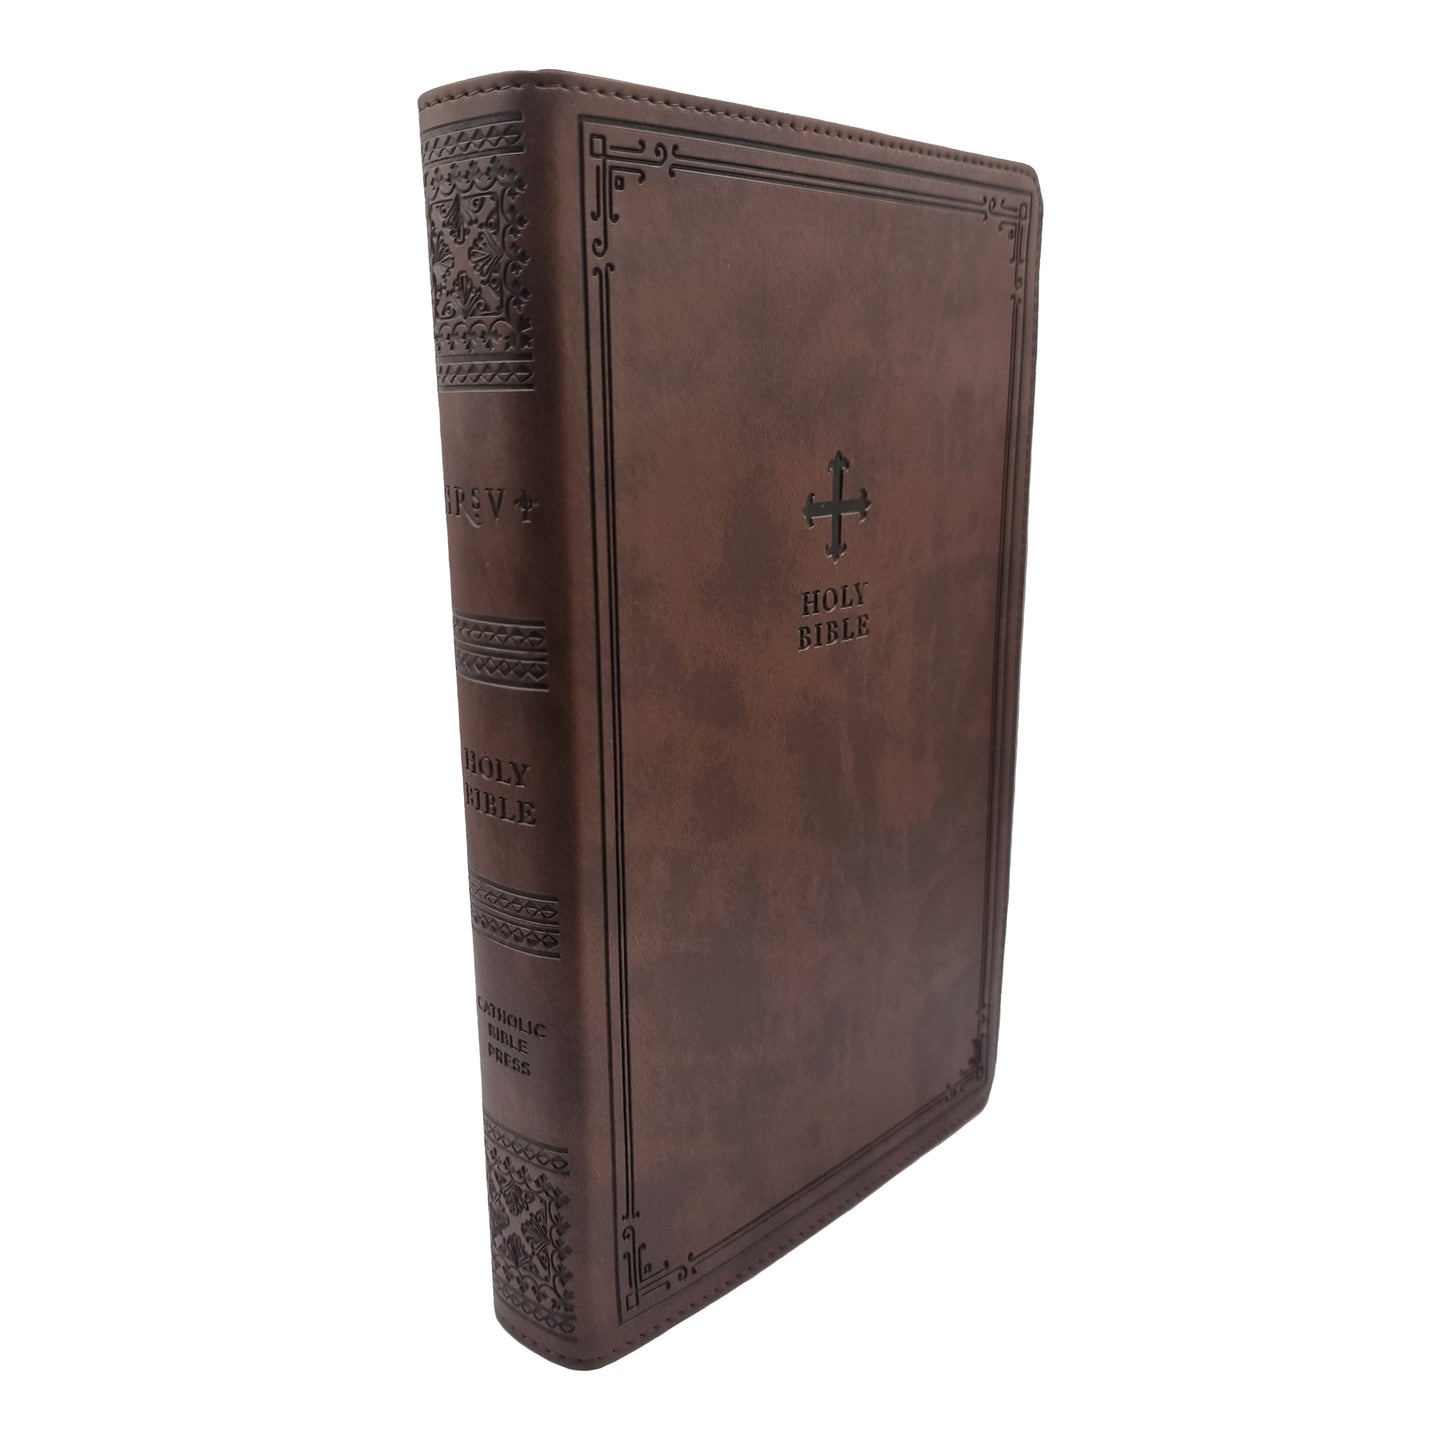 Catholic Holy Bible (New Revised Standard Version) – Gift Edition With Gold Edge